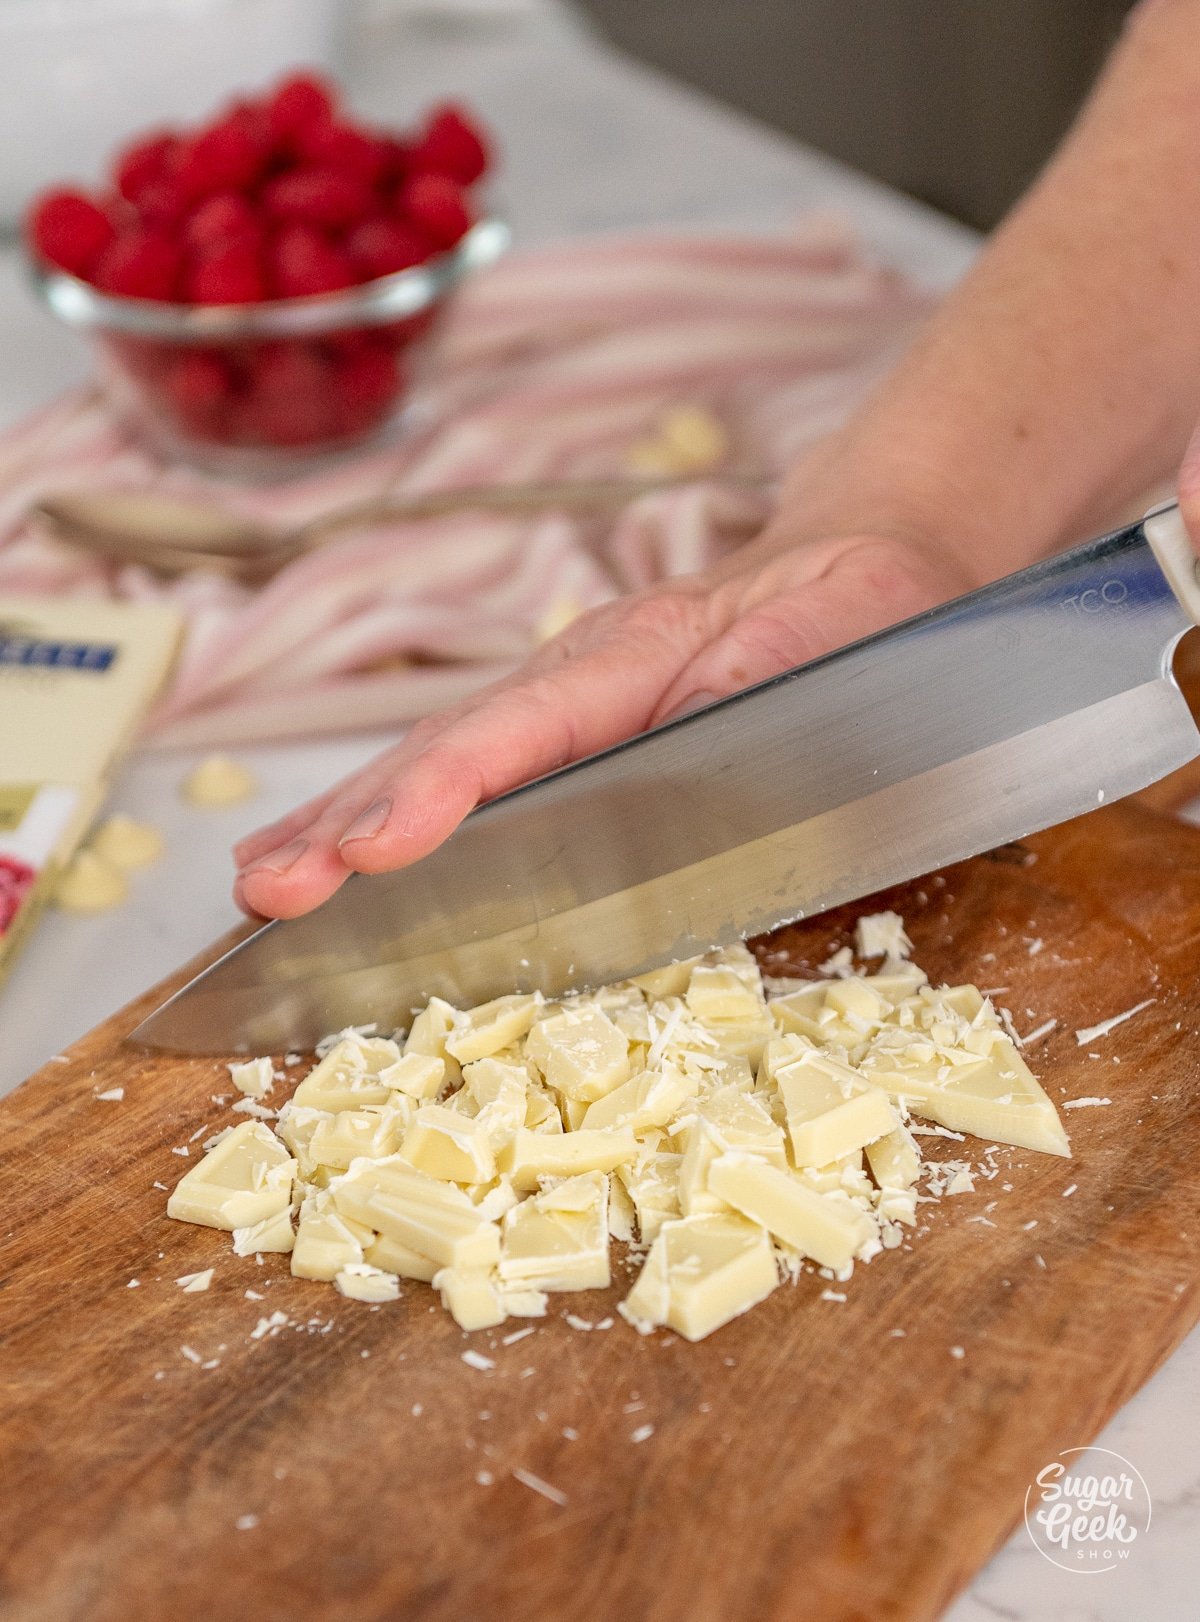 hand chopping white chocolate with a knife.